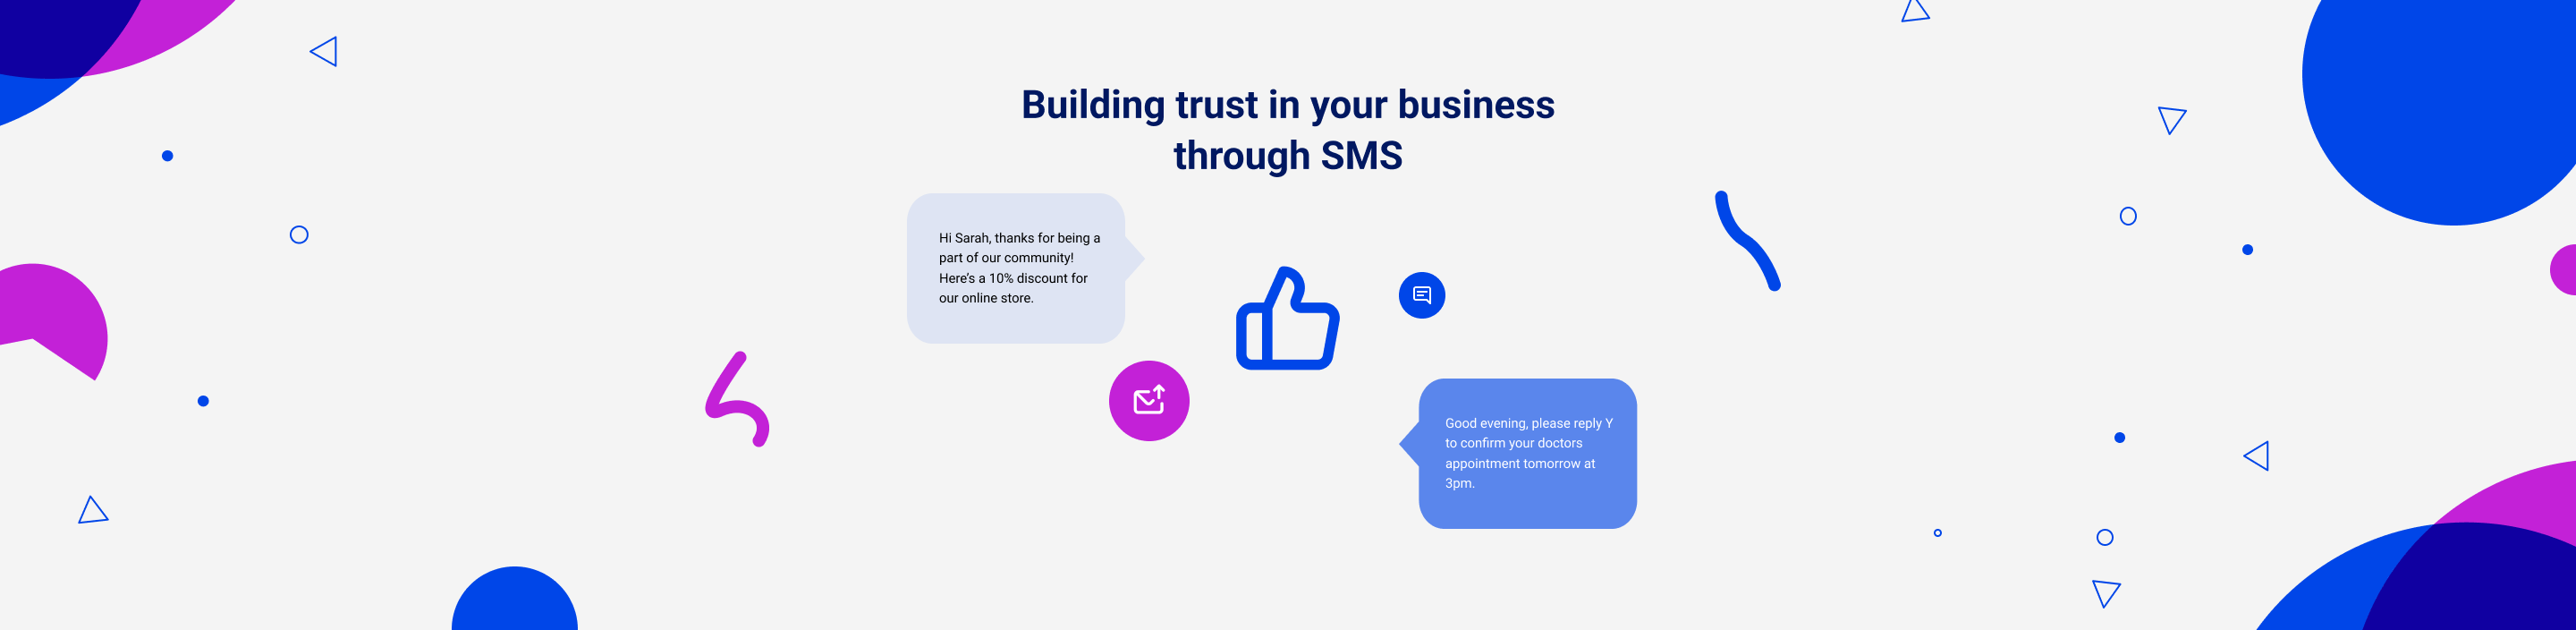 building-trust-in-your-business-through-SMS